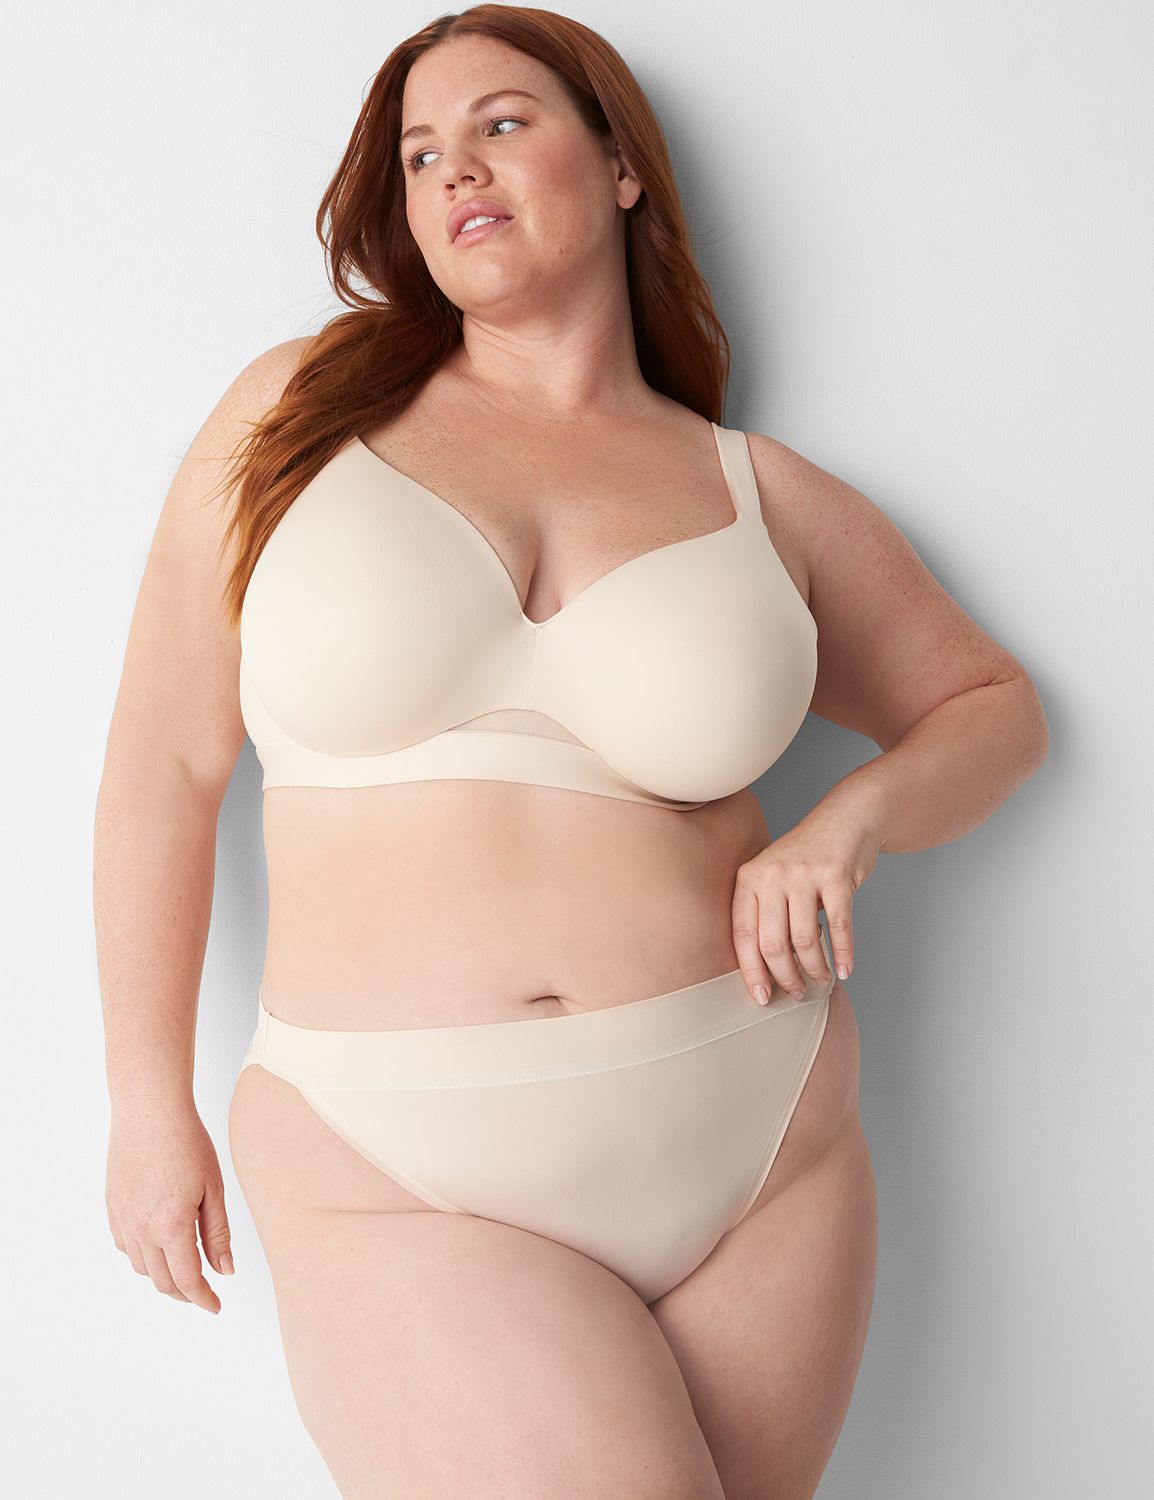 Lane Bryant bras: The best plus-size bras from the Comfort Bliss